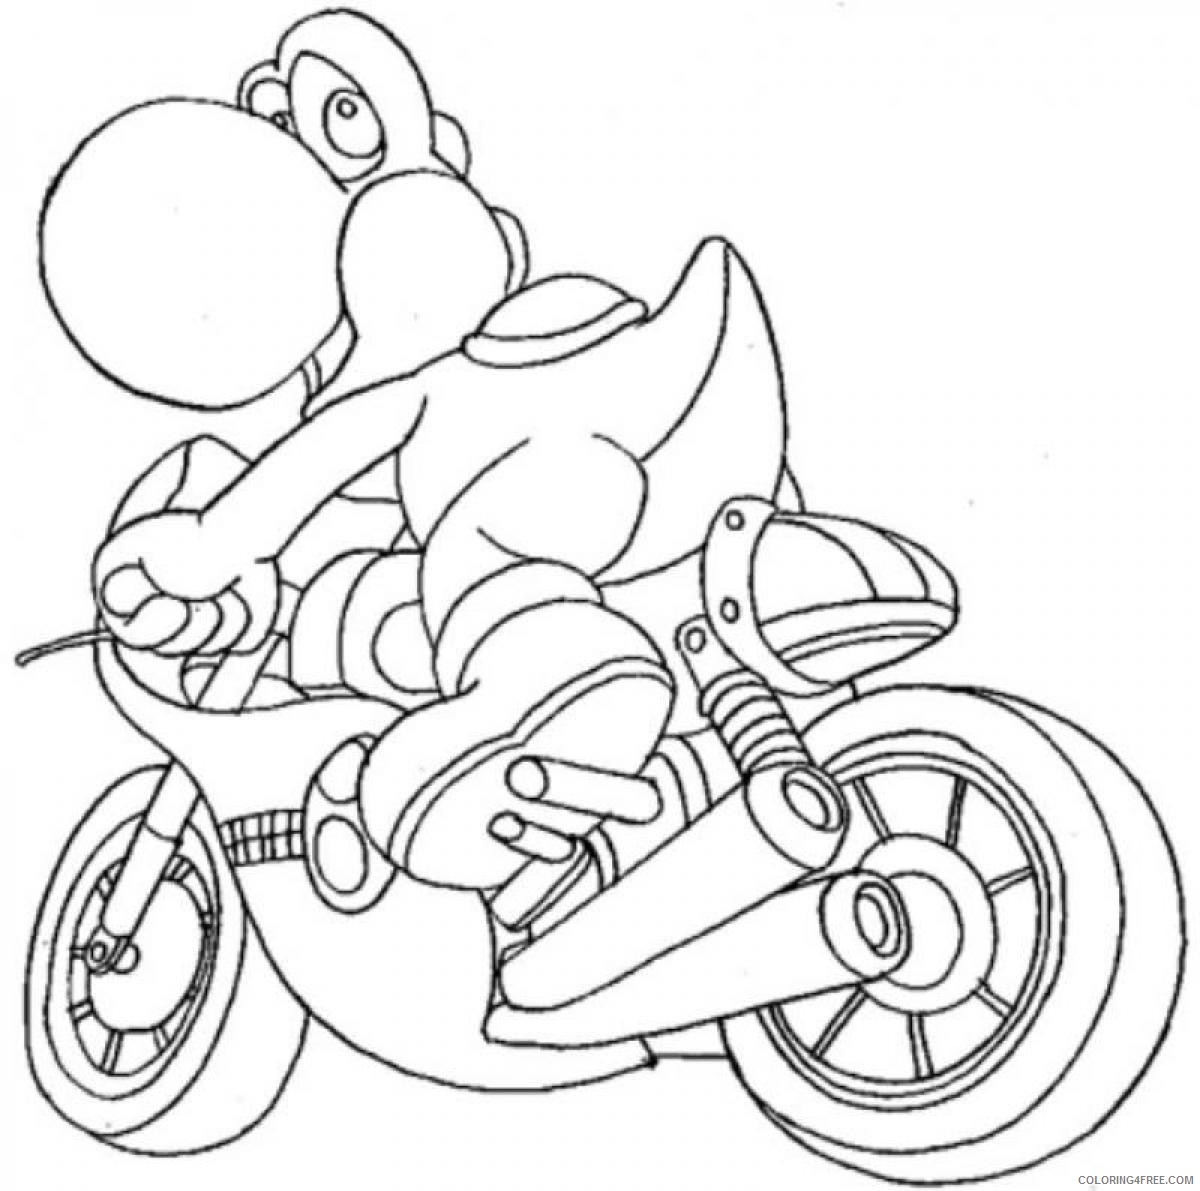 print Coloring4free yoshi coloring pages riding motorcycle Coloring4free